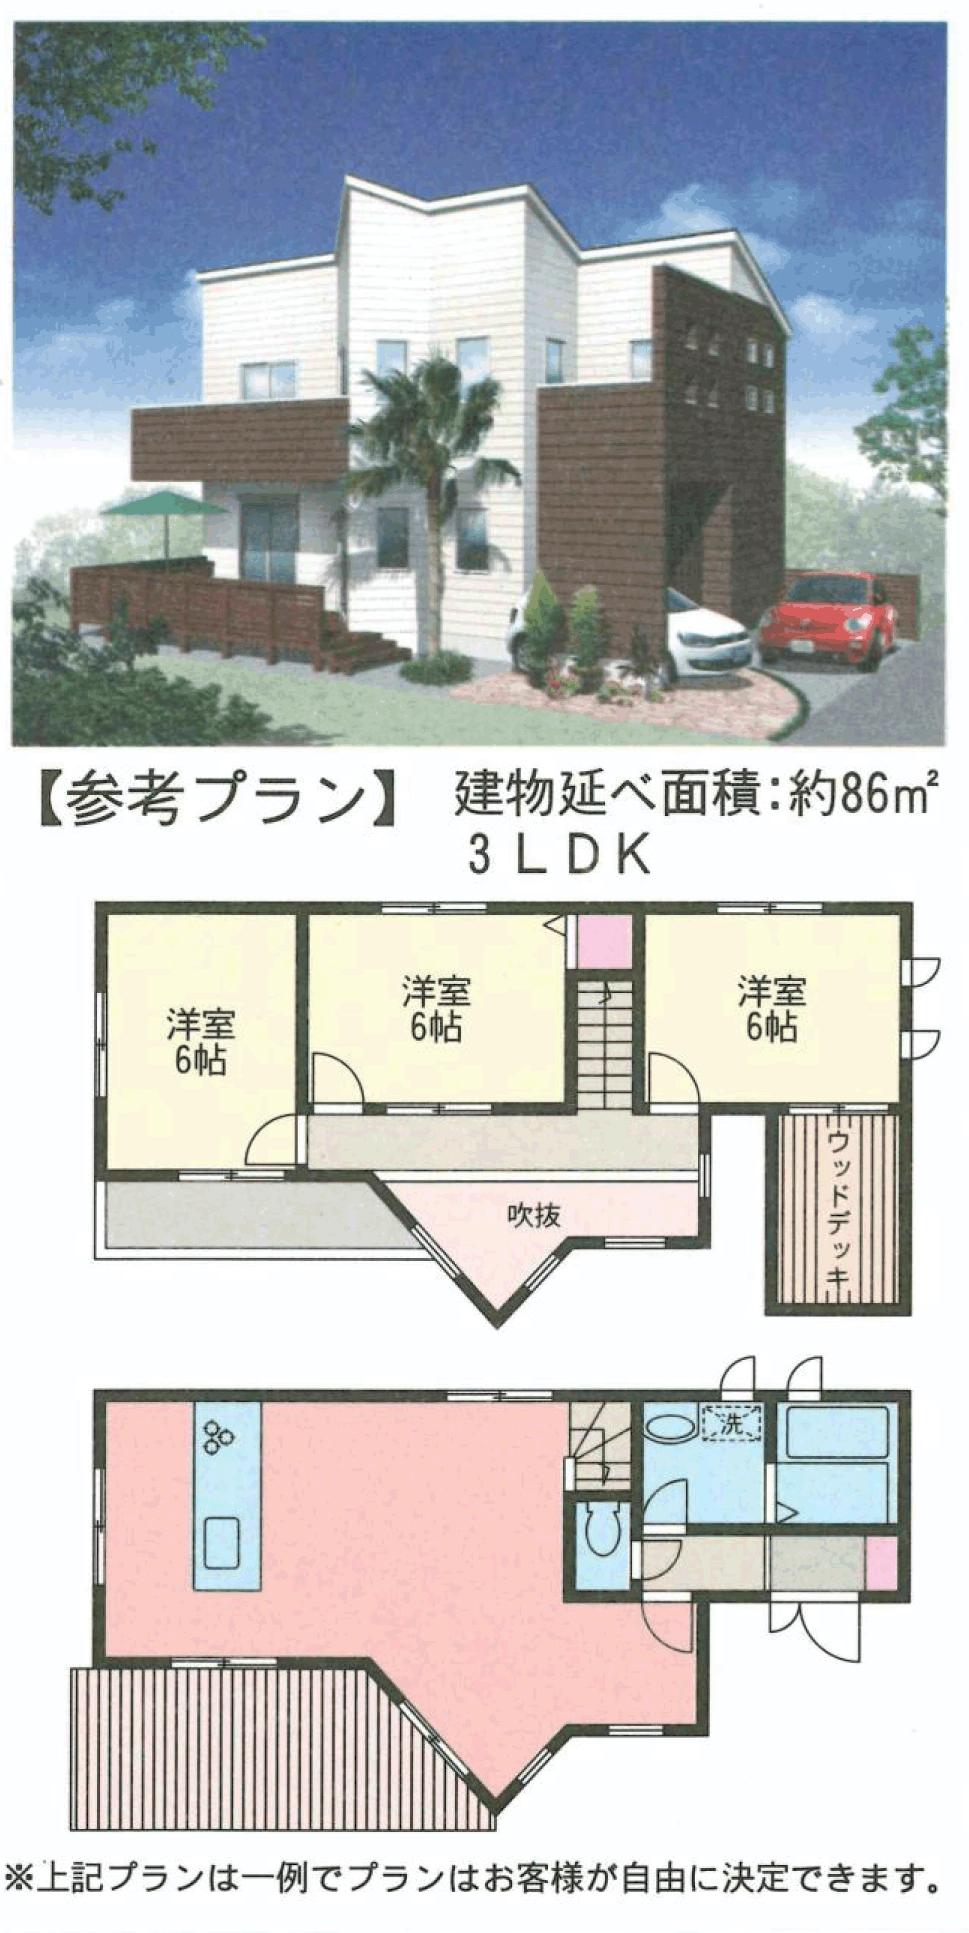 Building plan example (Perth ・ appearance). Building plan example, Building area 86 sq m  3LDK